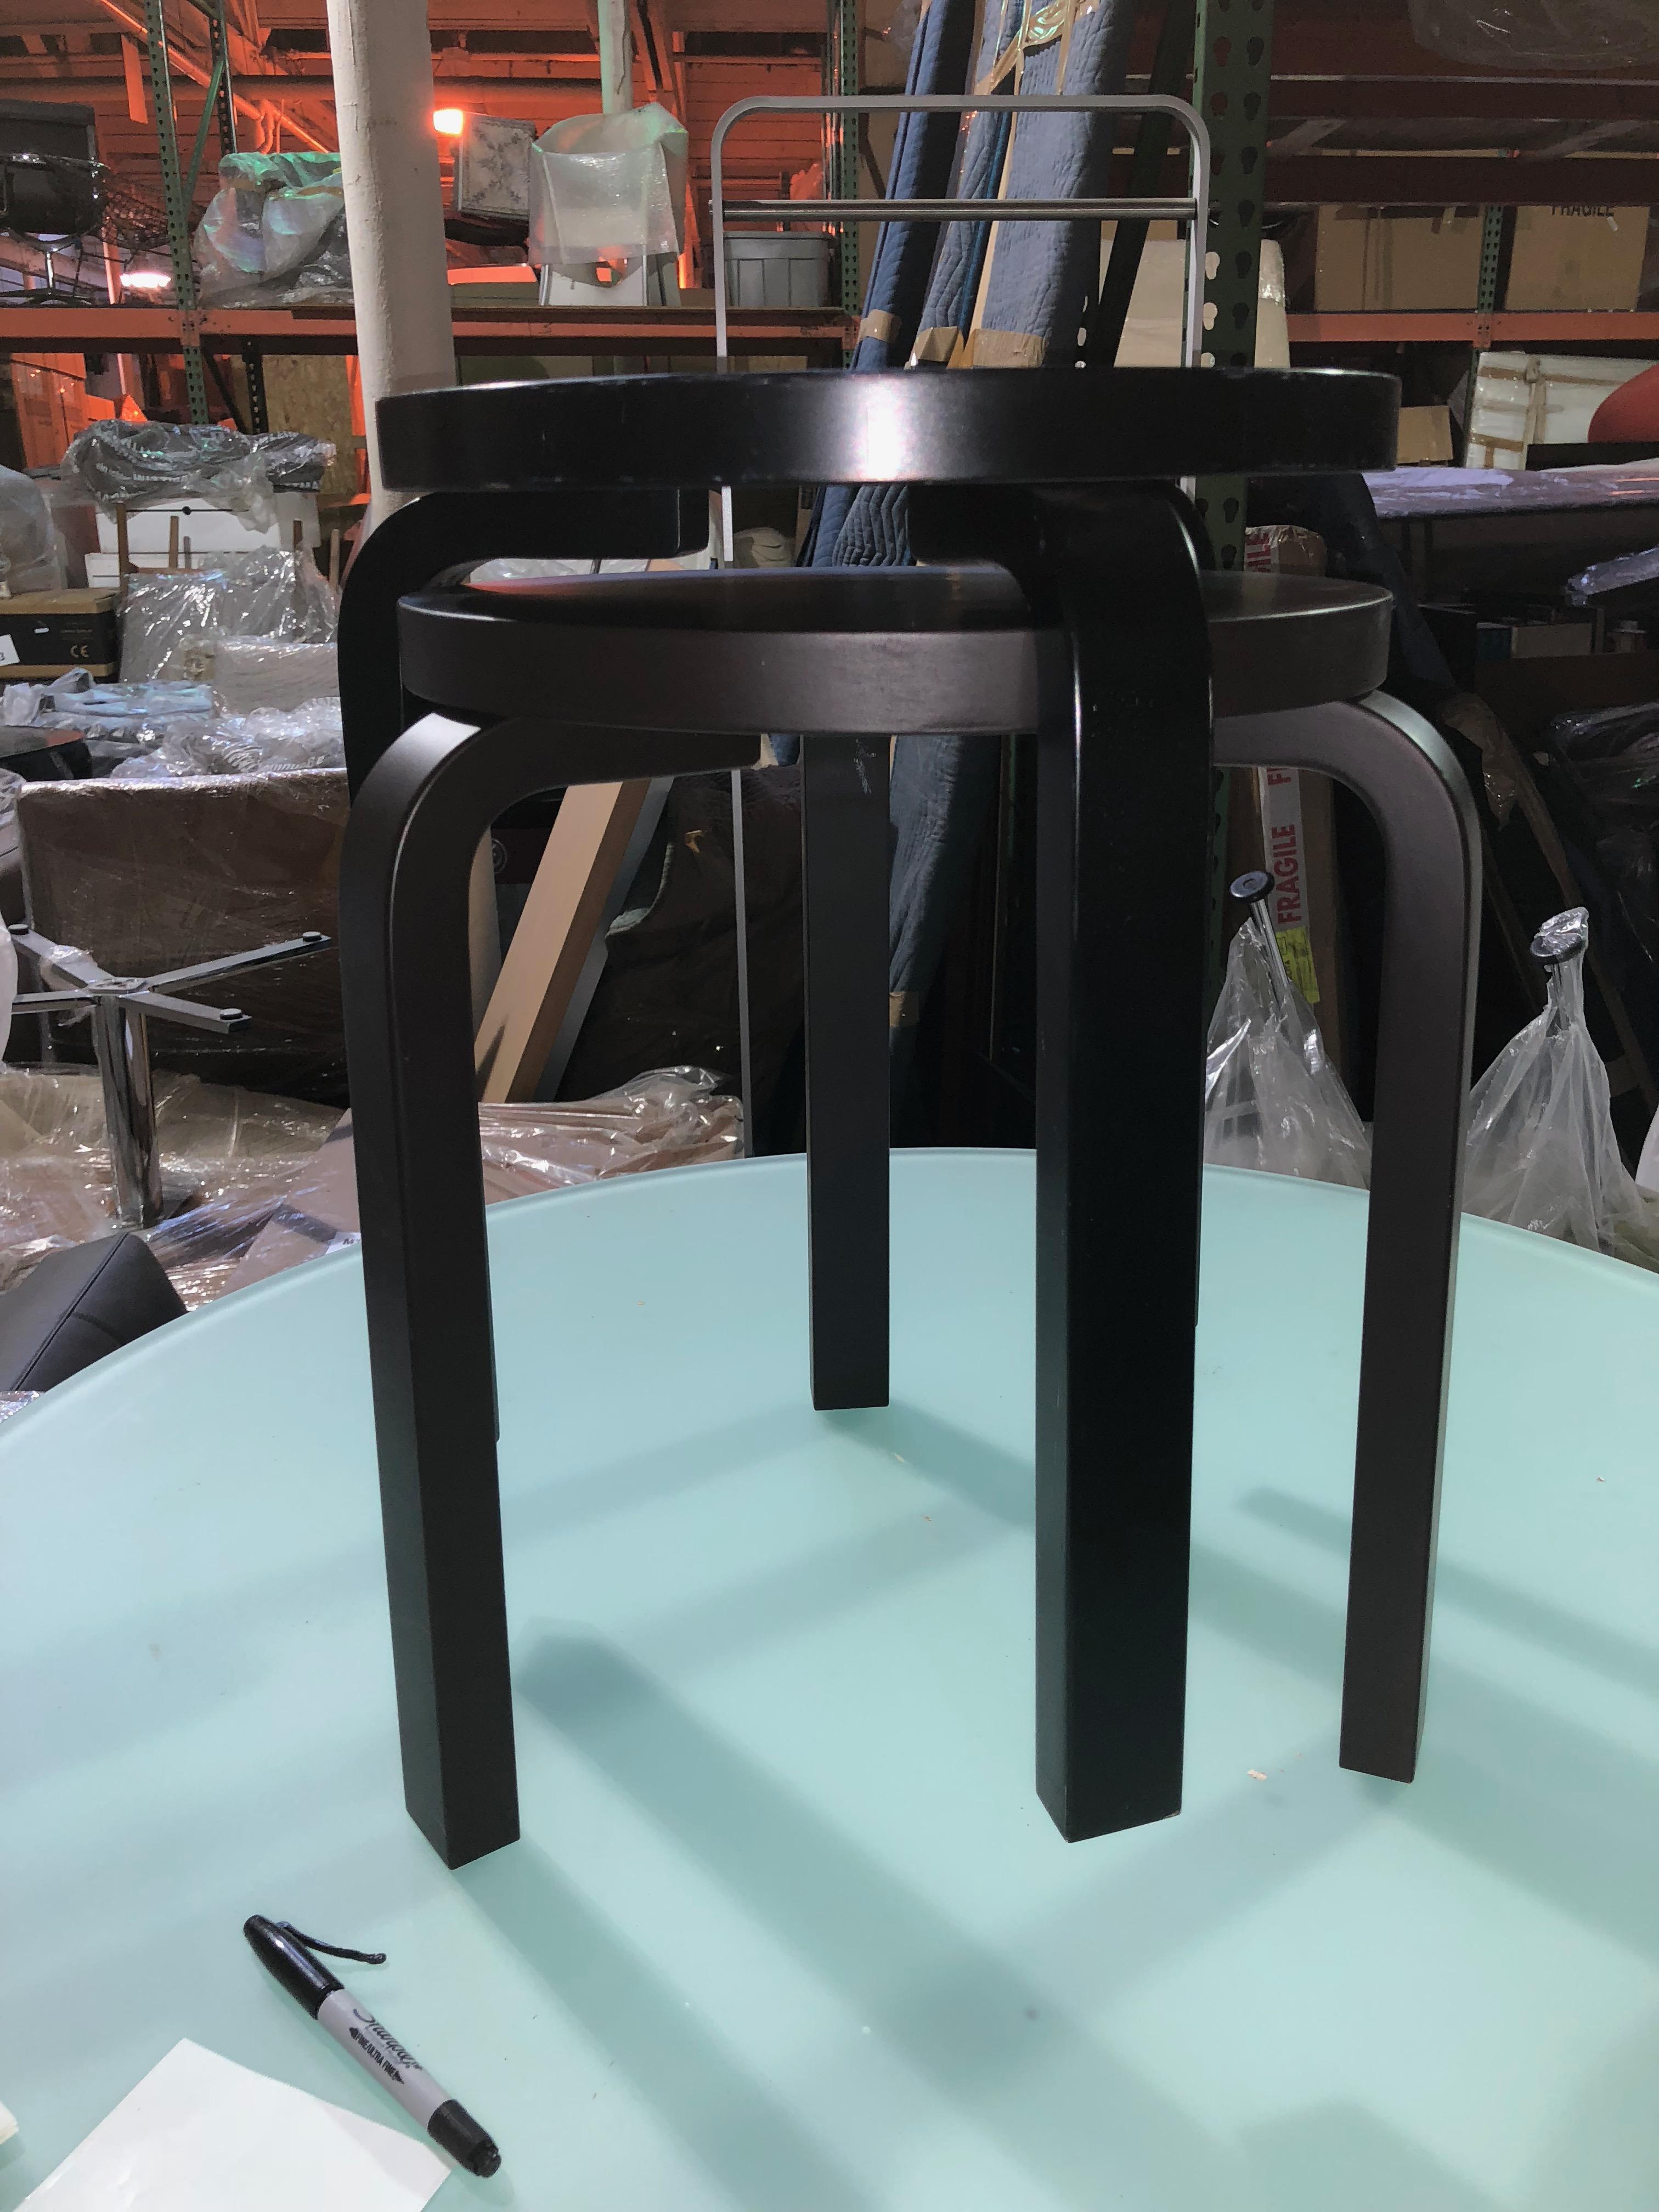 2 stools available, one brown and one black.
Can buy one or both.
Alvar Aalto’s iconic stool 60 is the most elemental of furniture pieces, equally suitable as a seat, a table, storage unit, or display surface. The legs are mounted directly to the